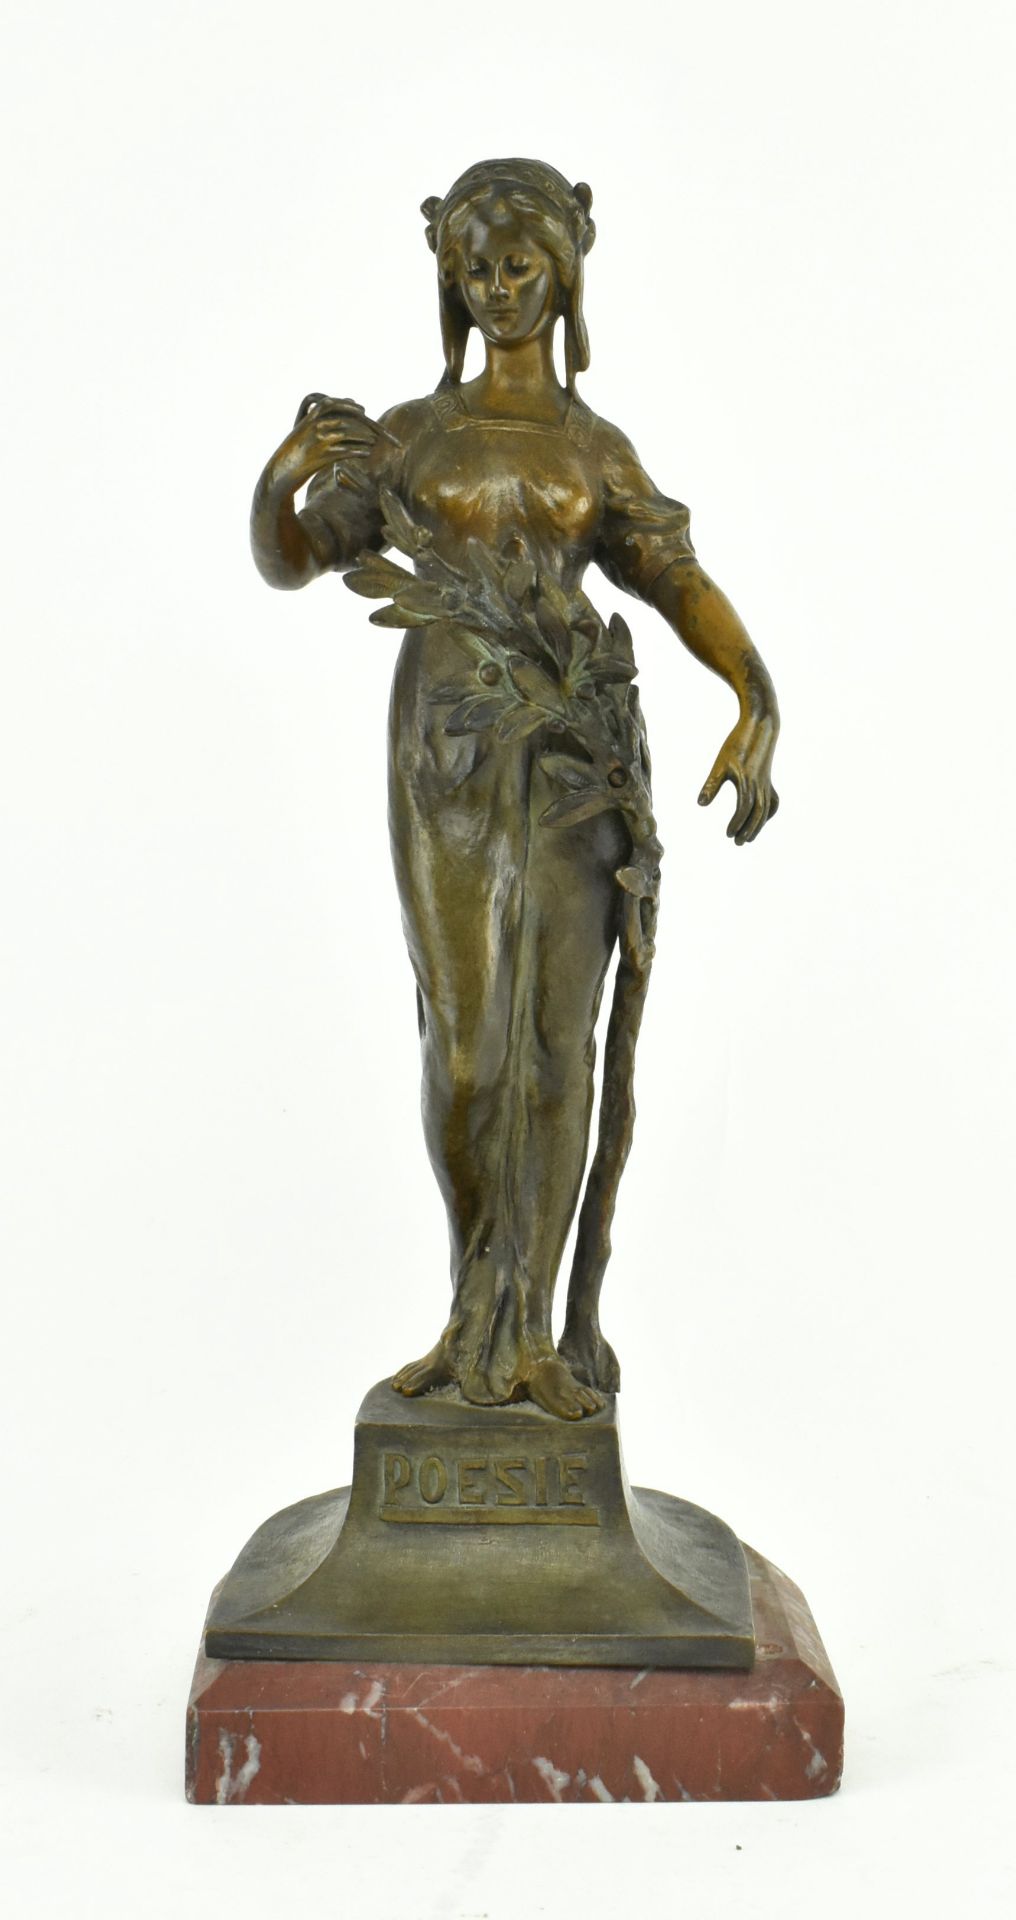 ANDOR RUFF - BRONZE FIGURINE OF A LADY WITH HOLLIES